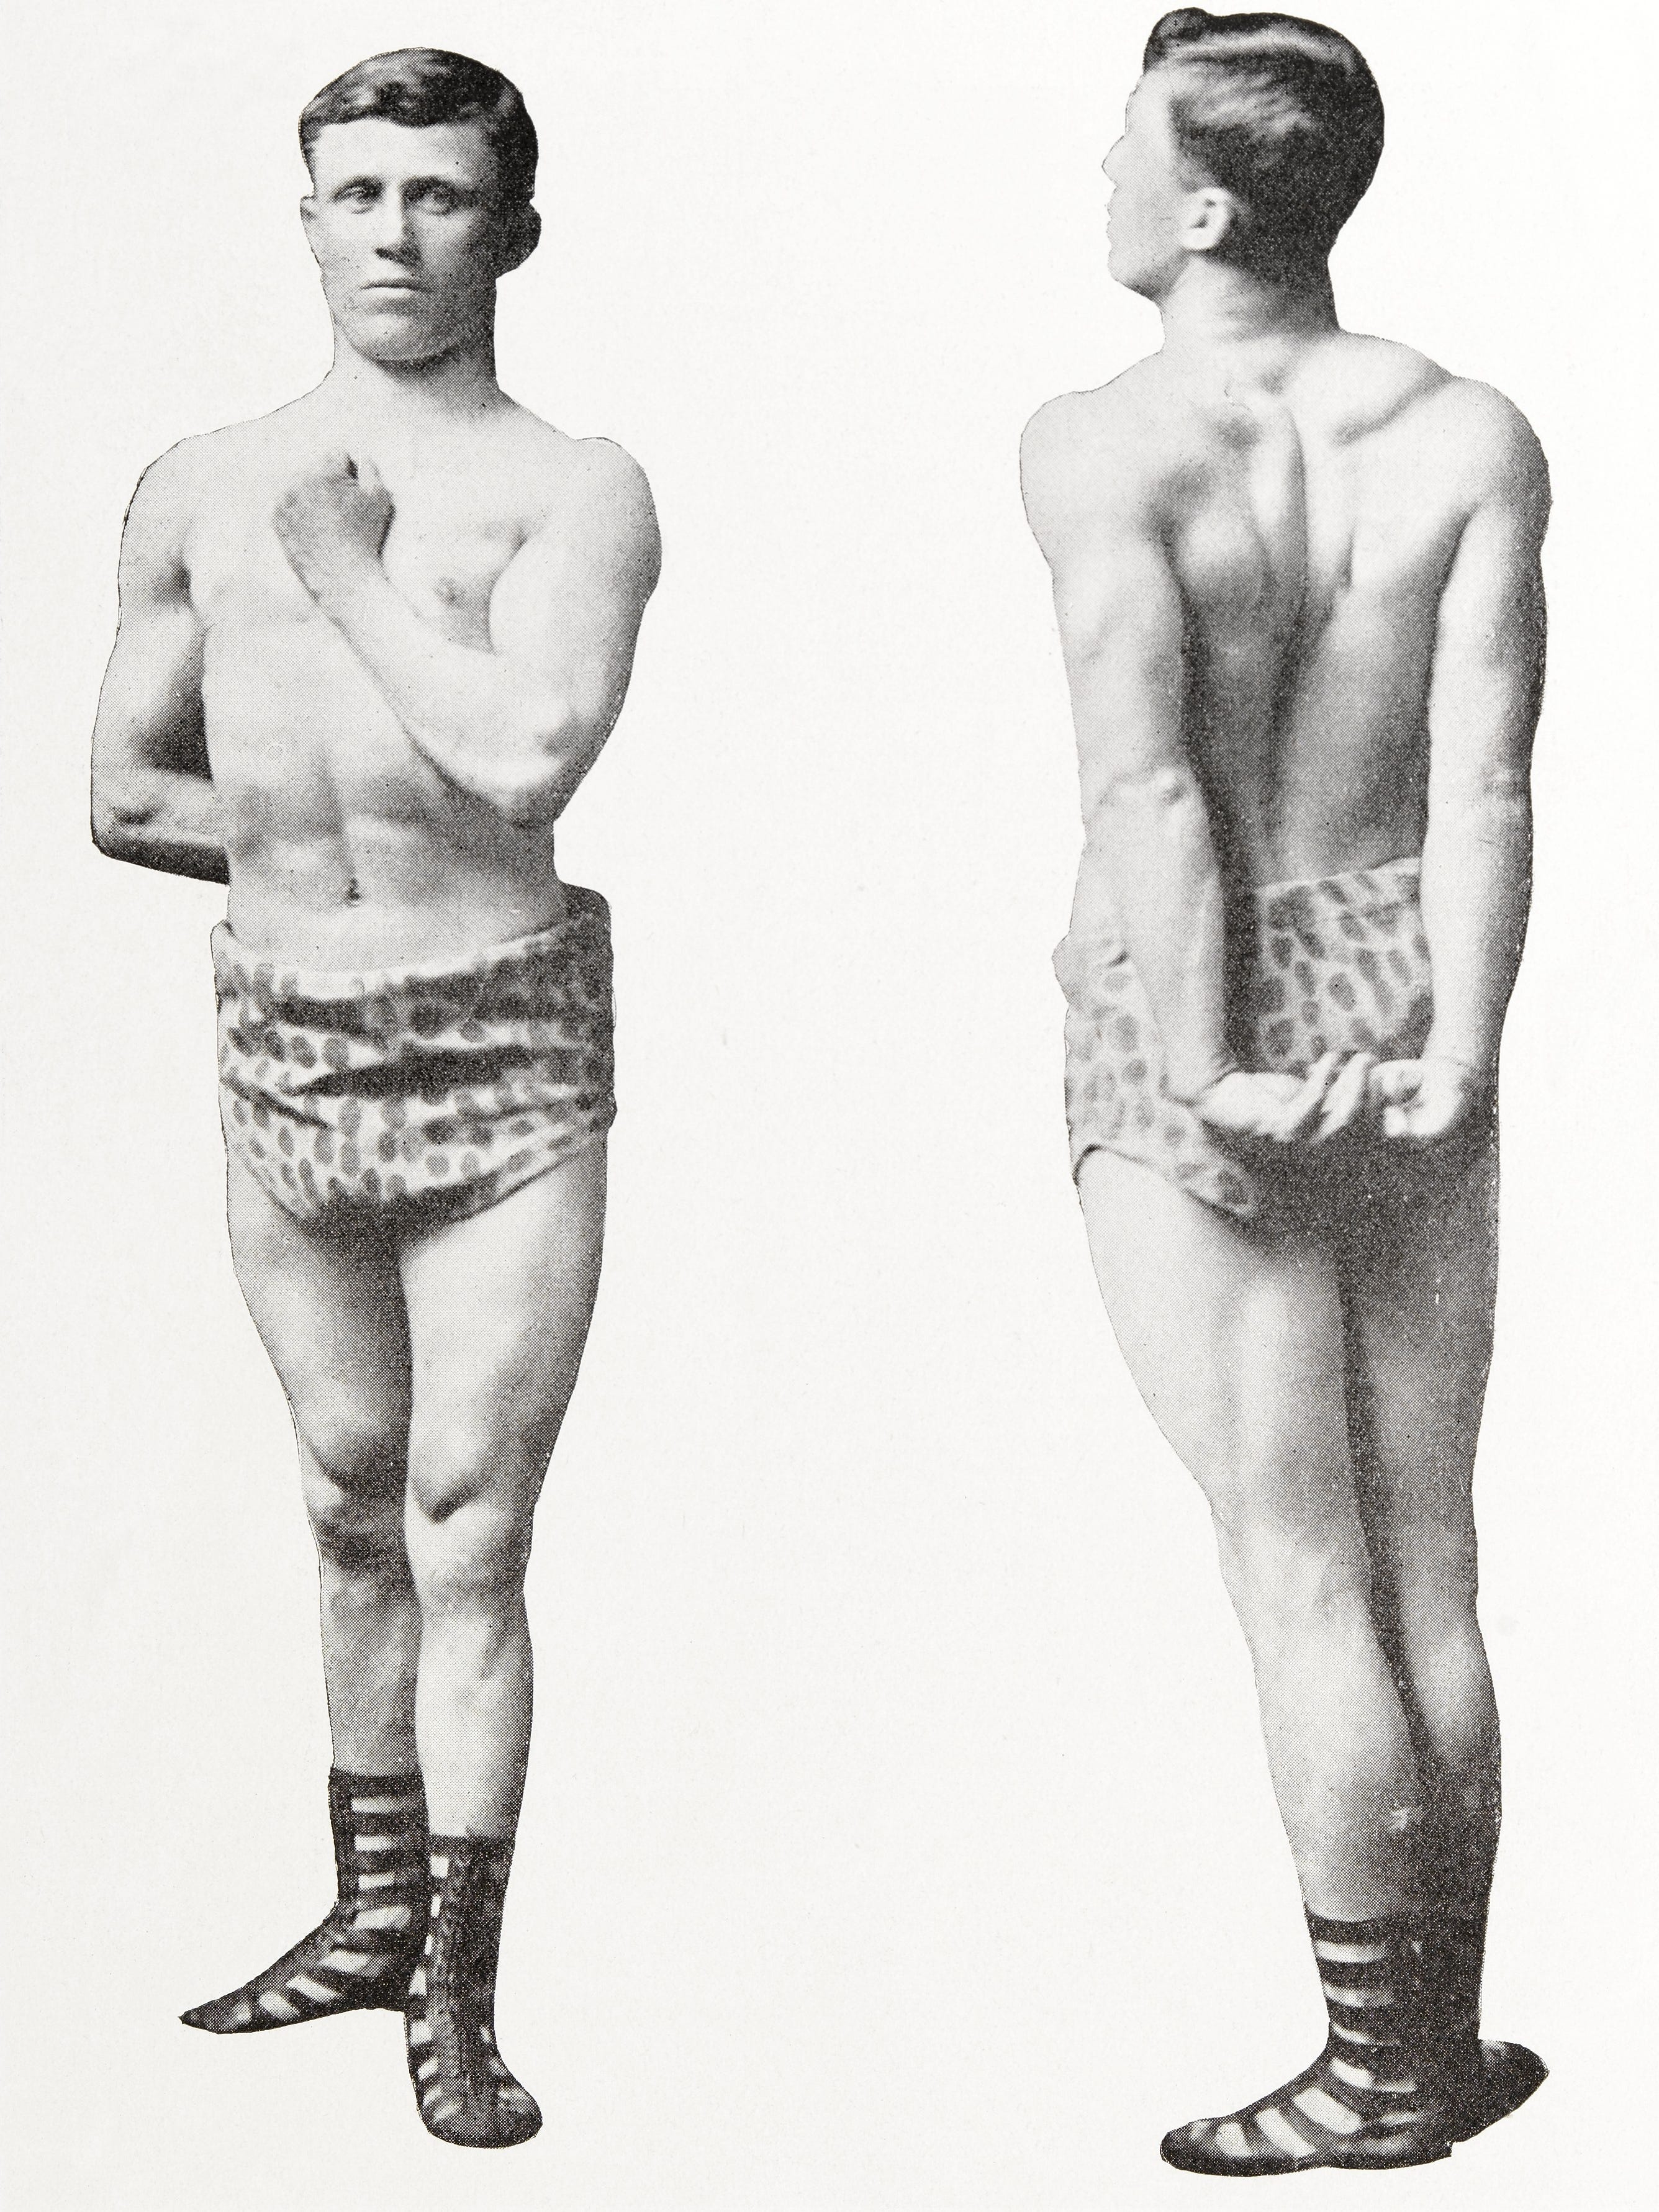 An example of "splendid physical types" from a book by Eugen Sandow.